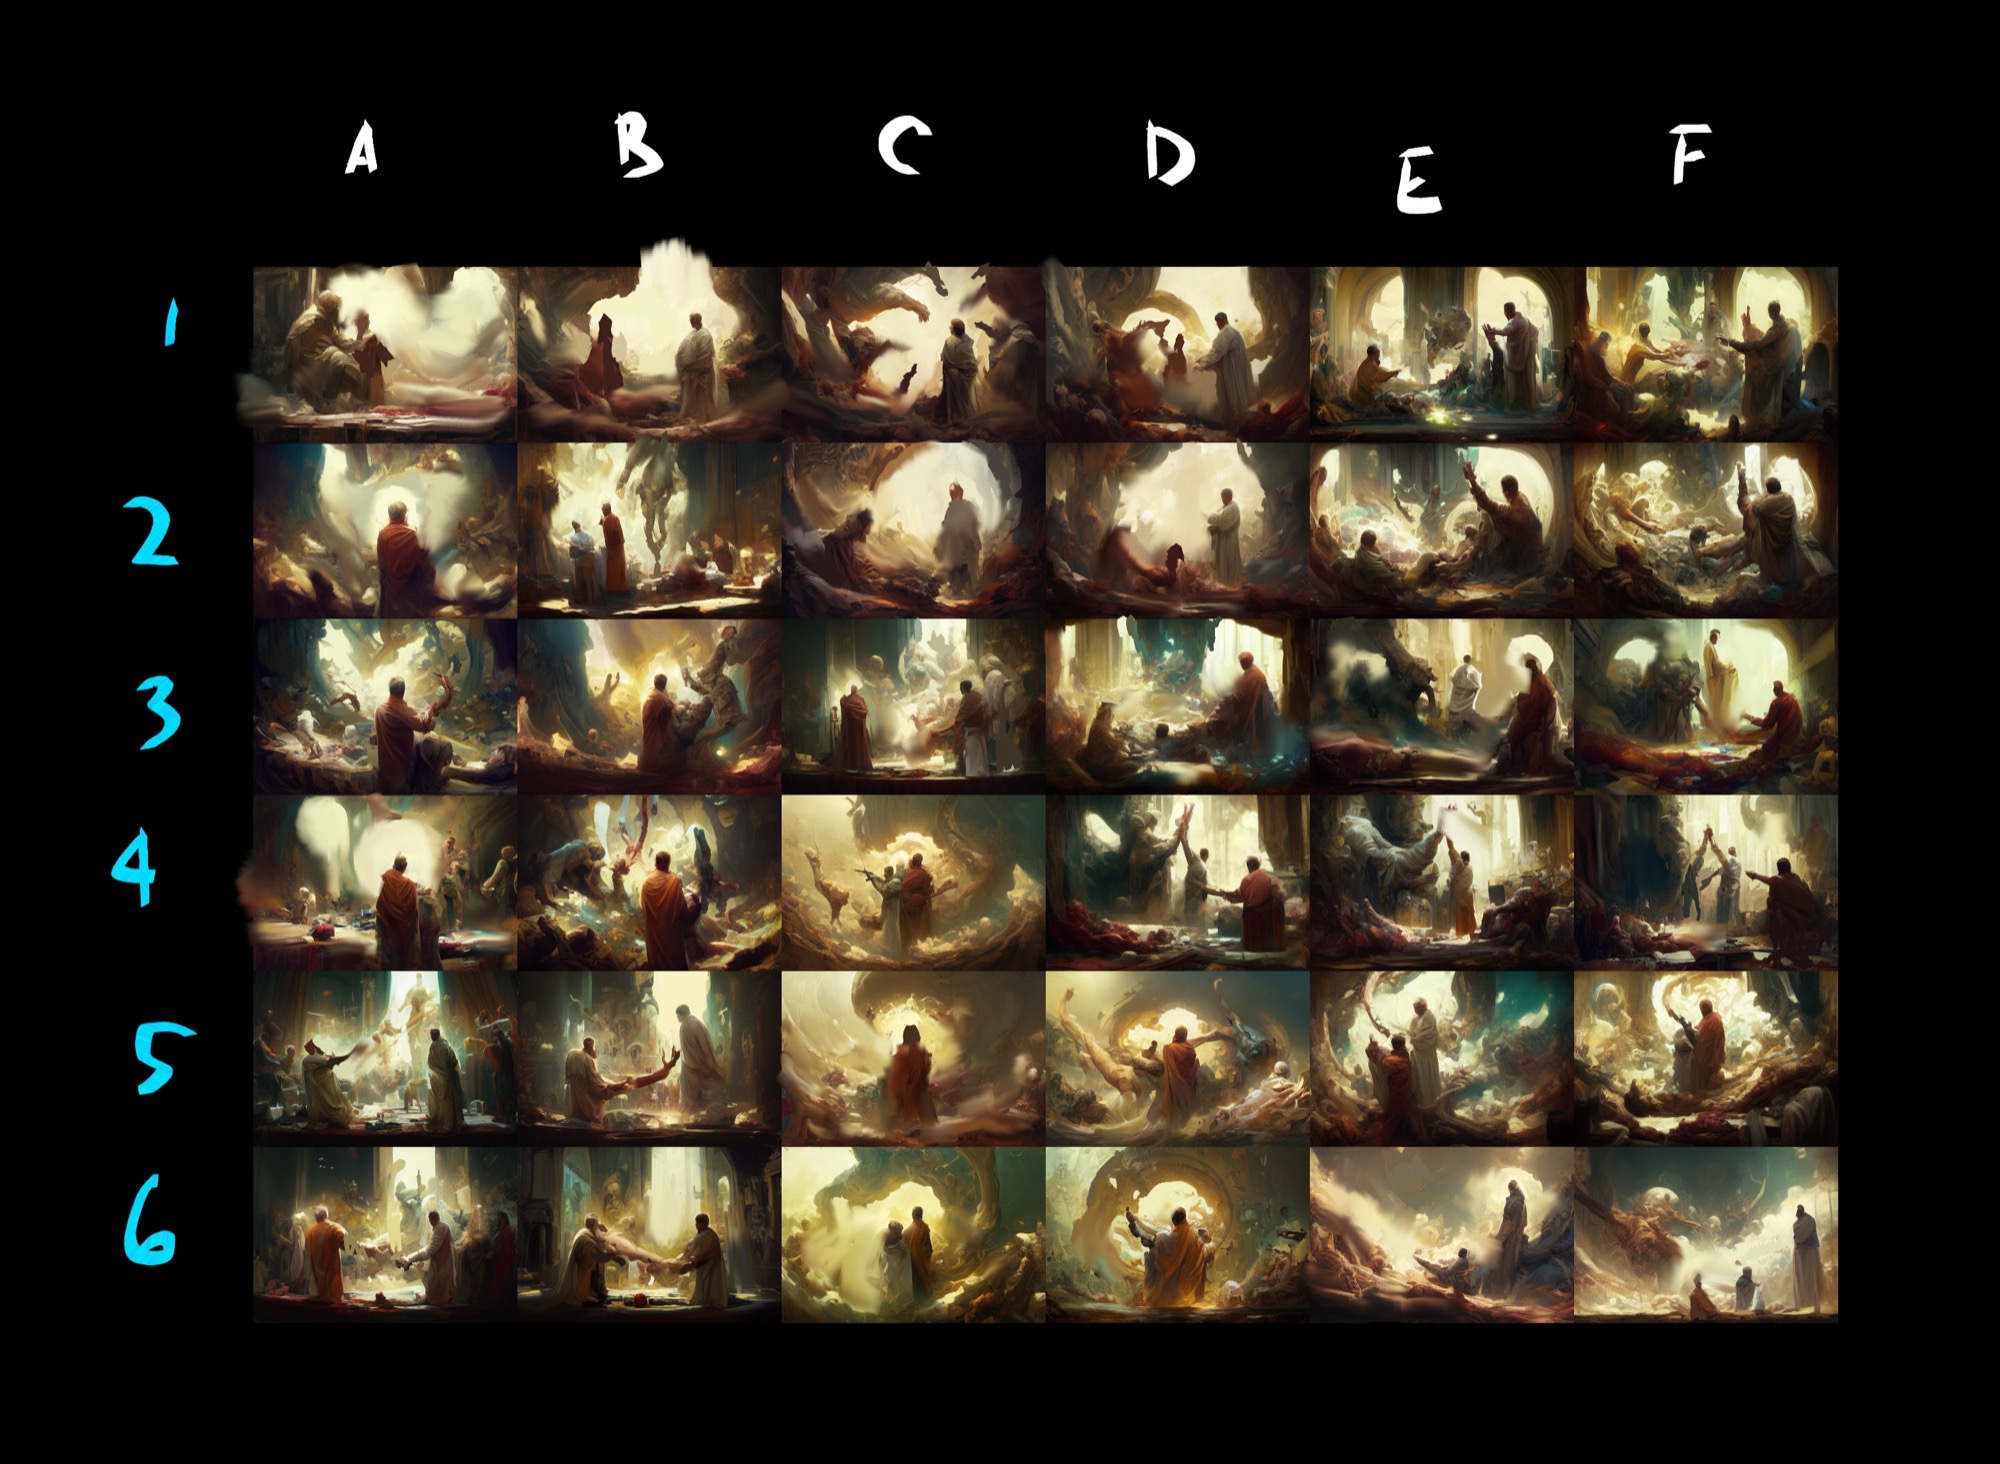 36 images arranged on six-by-six grid. all of them are slightly different but most have an oil painting style, accompanied by ominous swirling clouds, towering figures, and disembodied outstretched arms. above the first horizontal row are handwritten letters, A-F). To the left of the first vertical column are the numbers 1-6